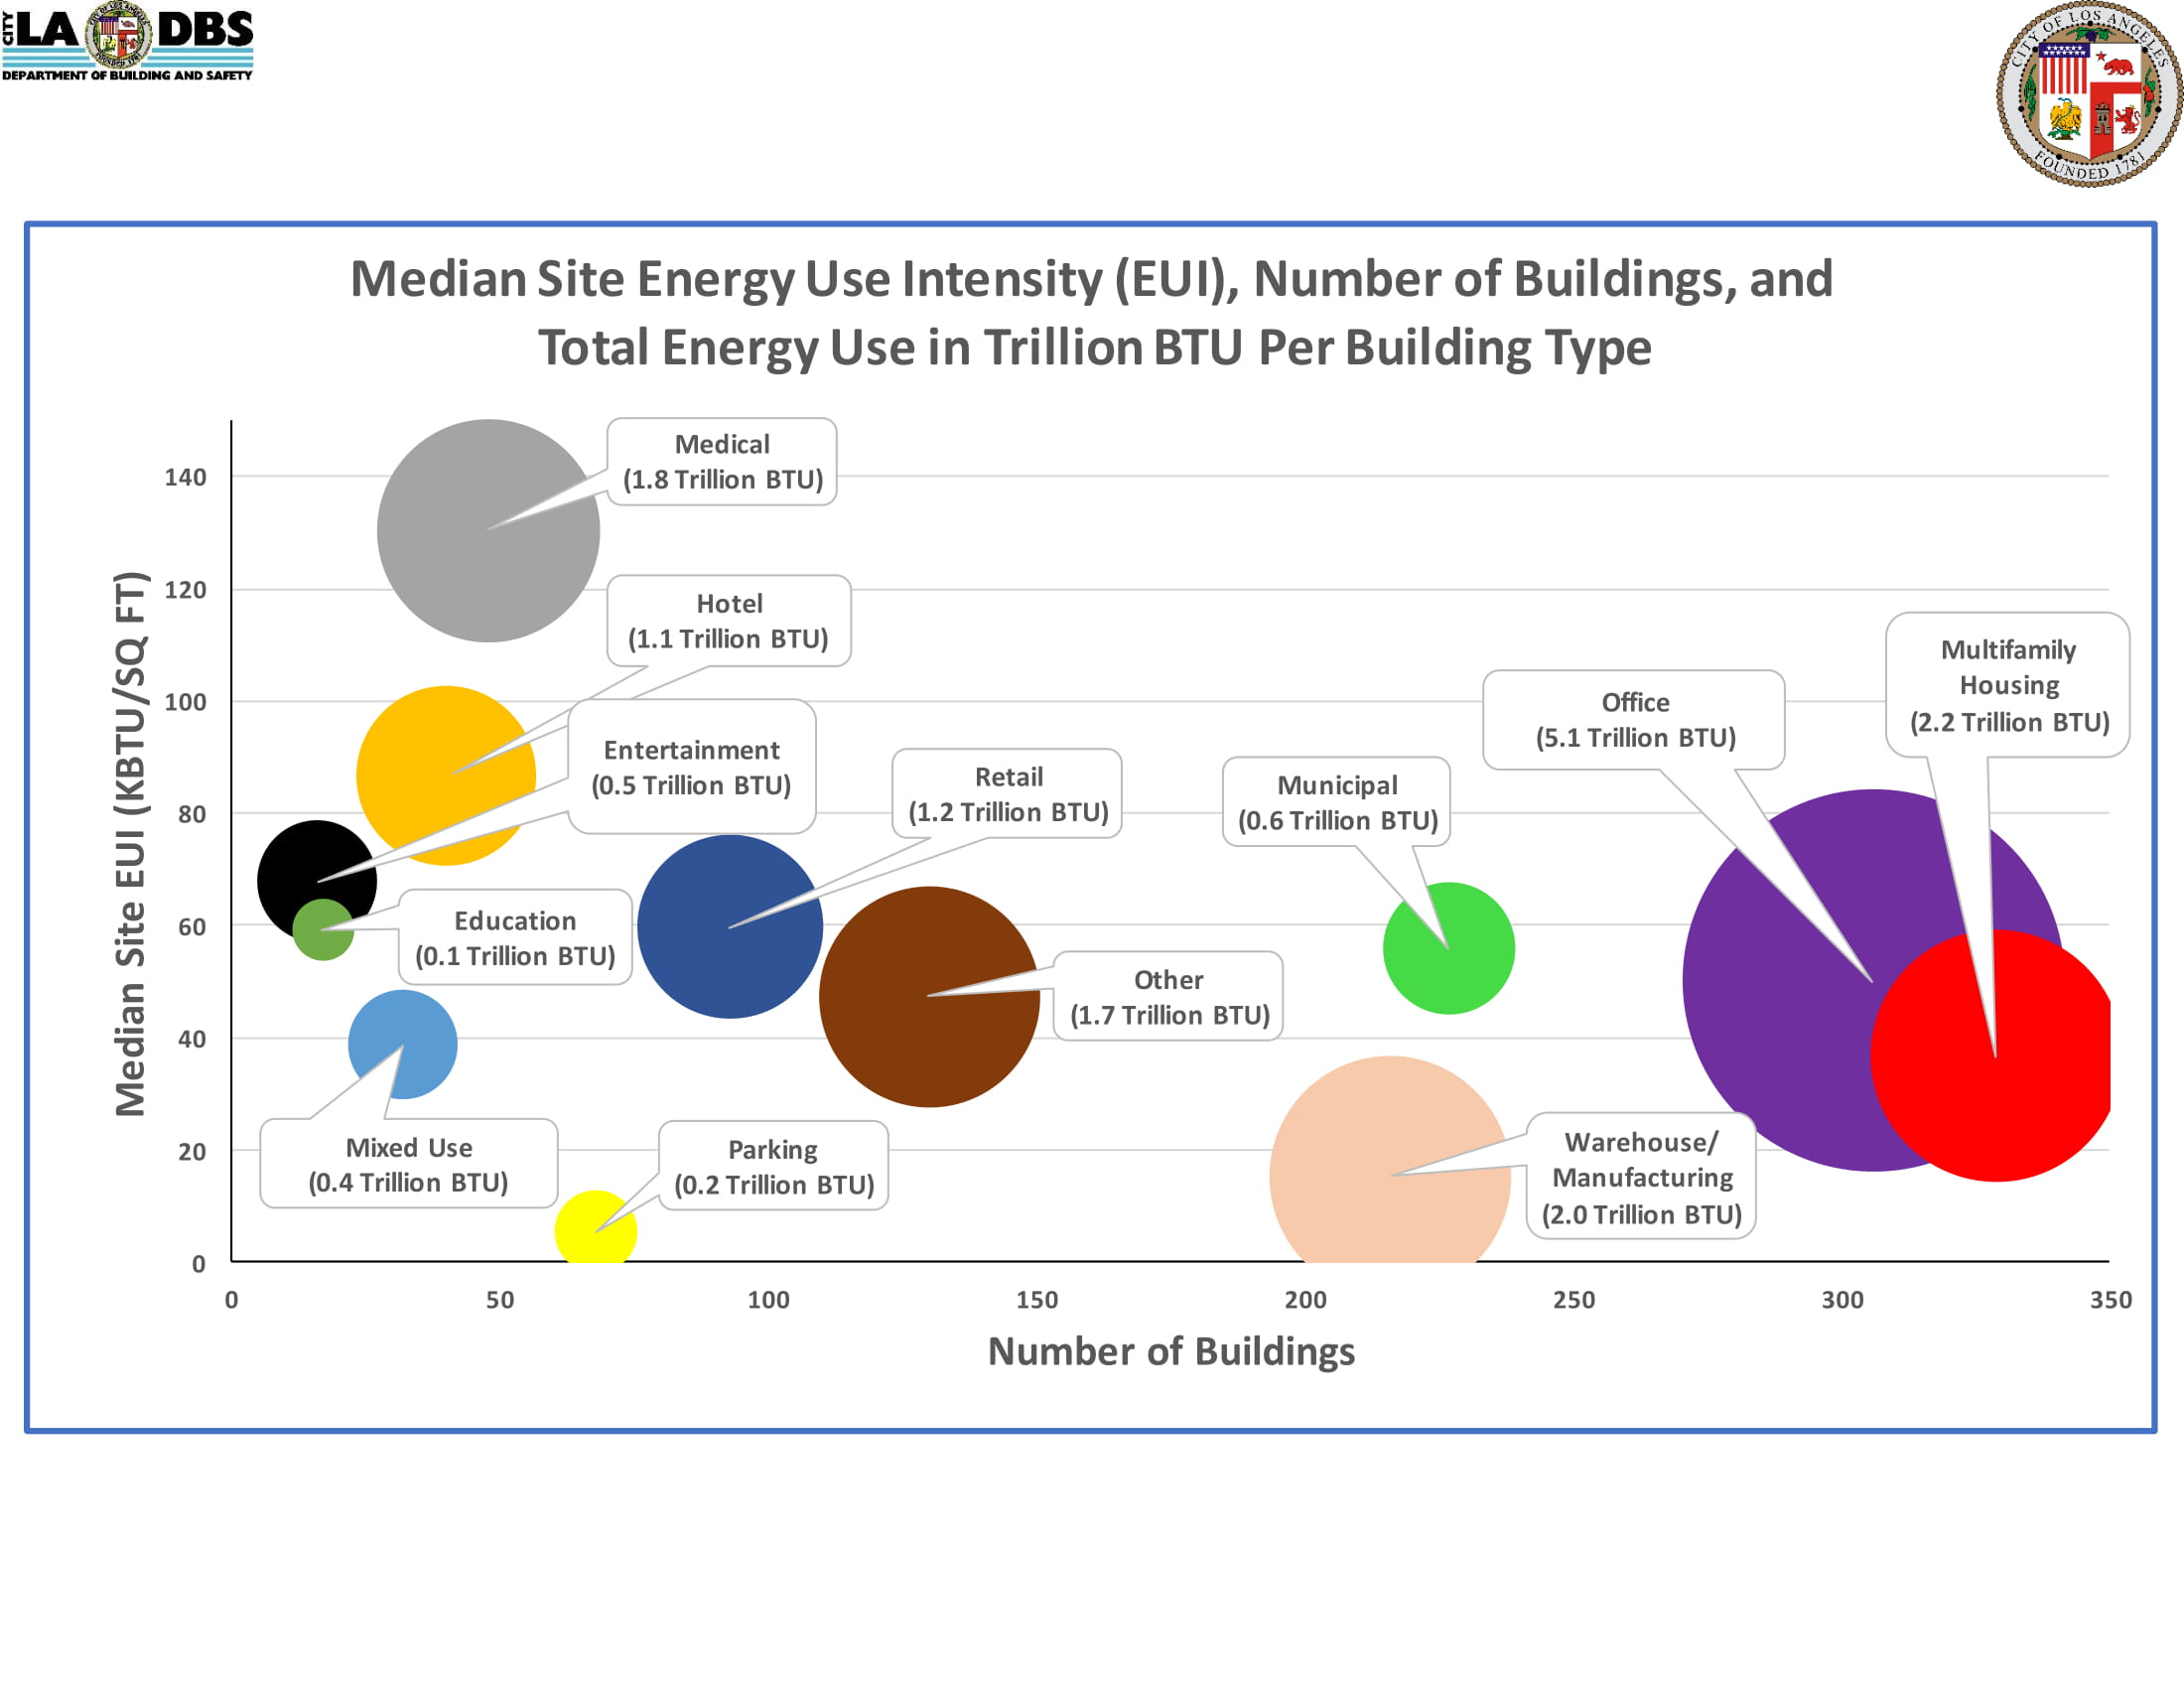 Median Site Energy Use Intensity (EUI) Number of Buildings and Total Energy Use in Trillion BTU Per Building Type